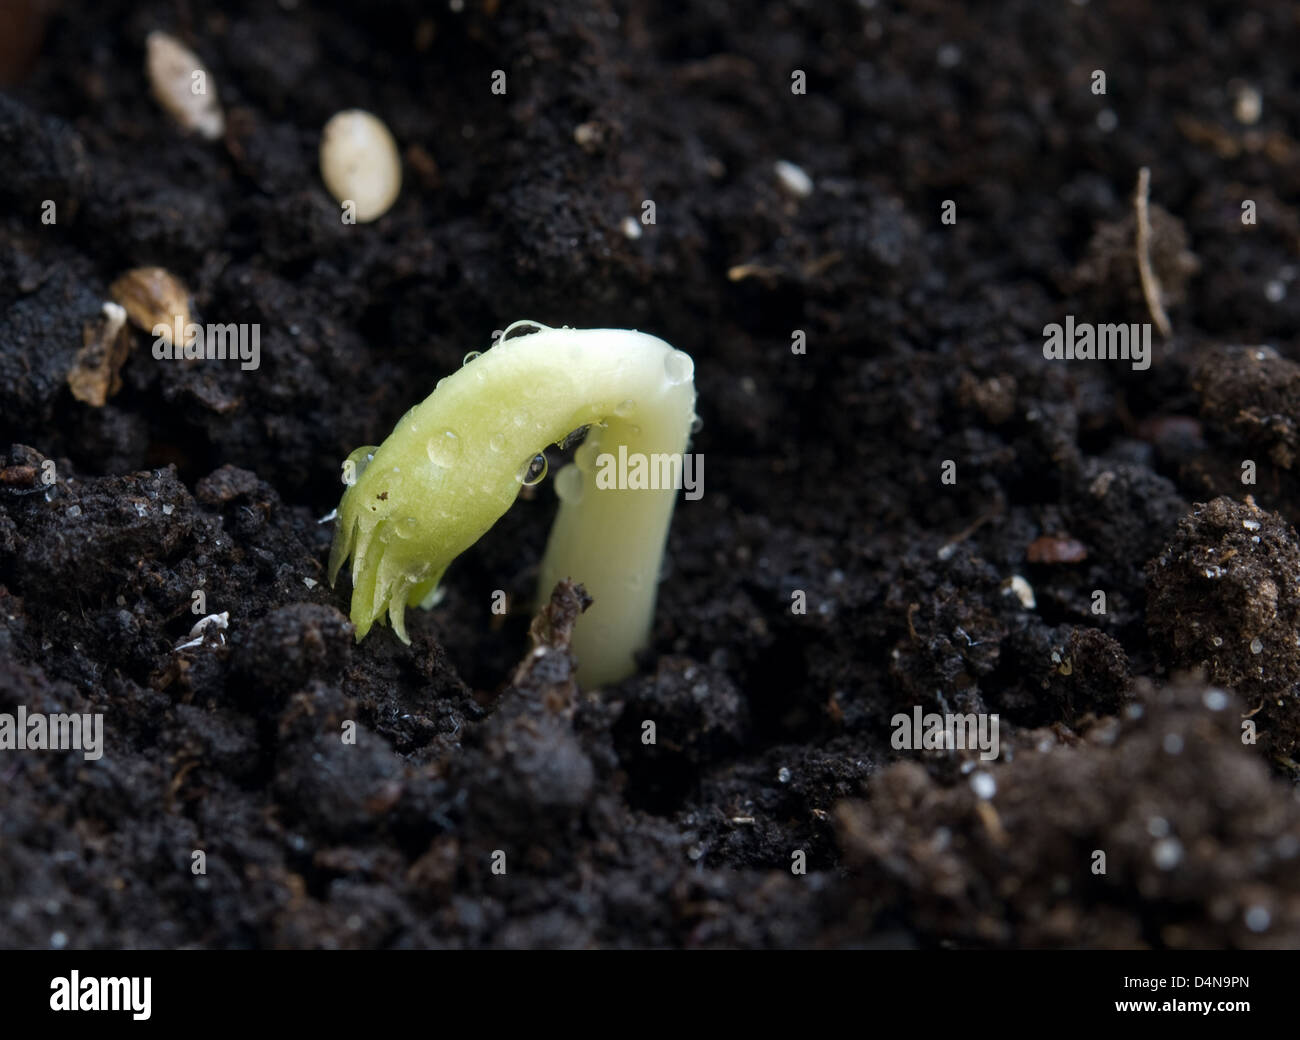 young green plant growing from soil Stock Photo